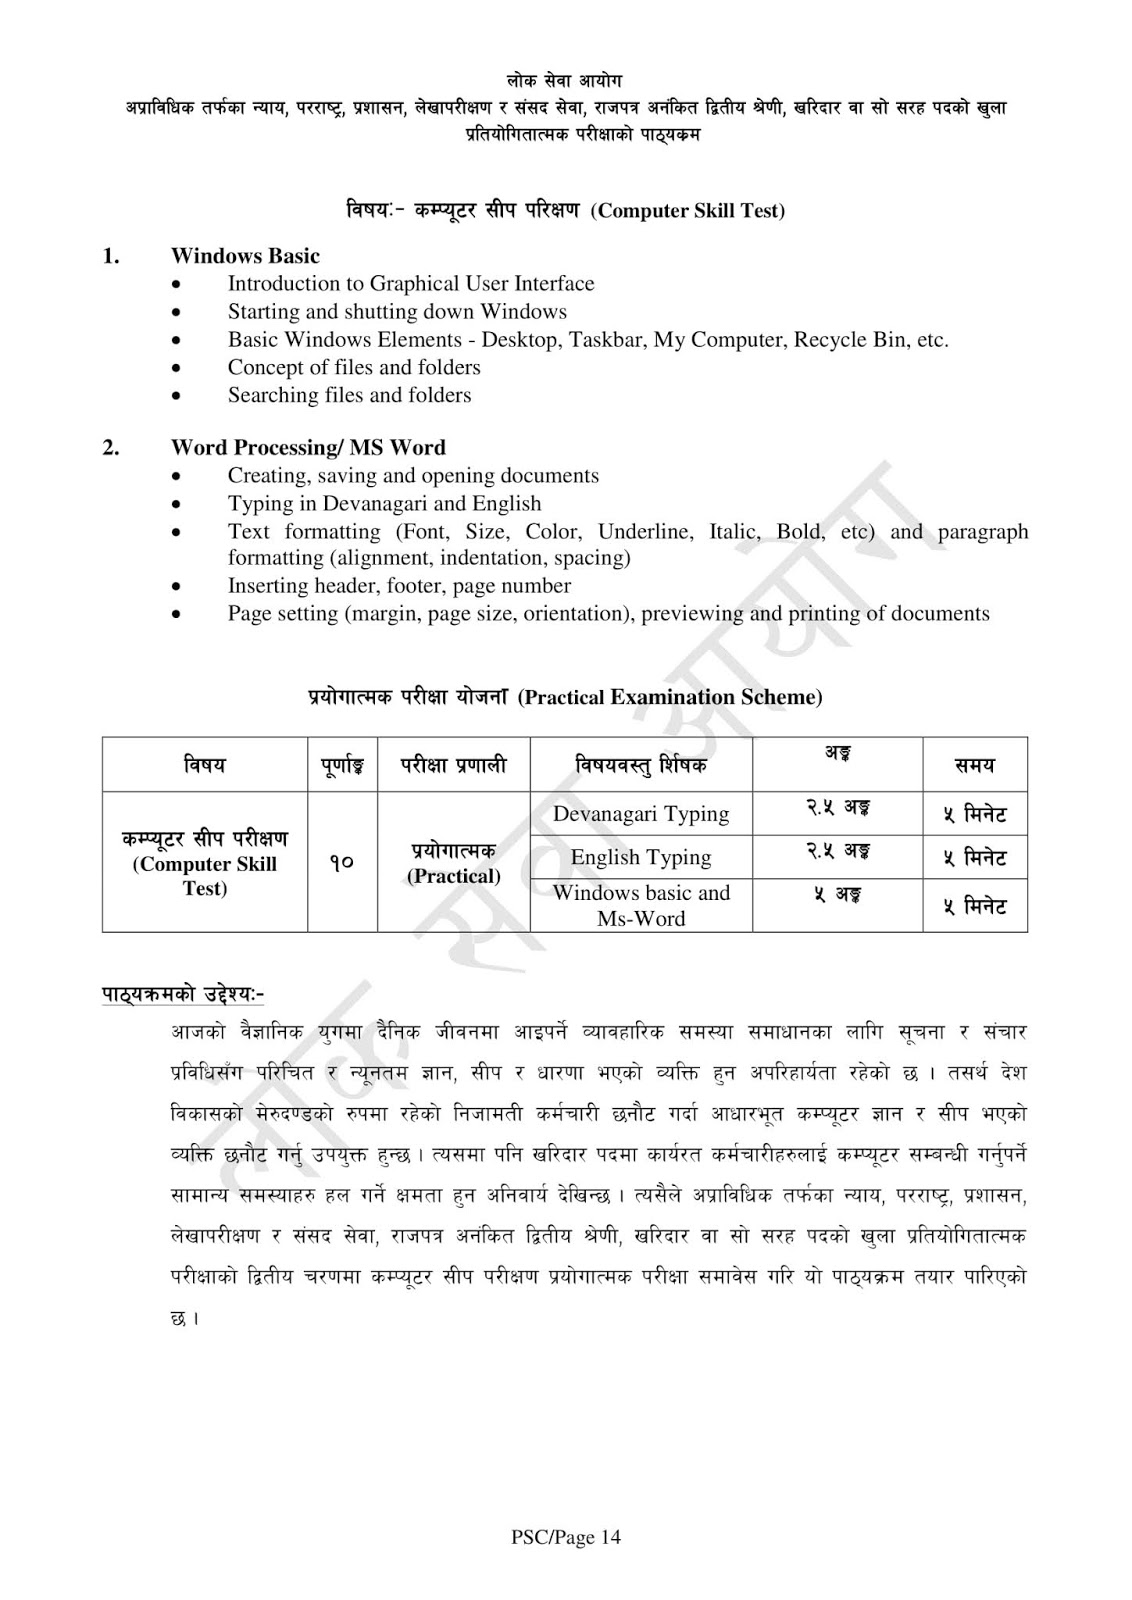 Kharidar All Paper Syllabus And Some Model Questions